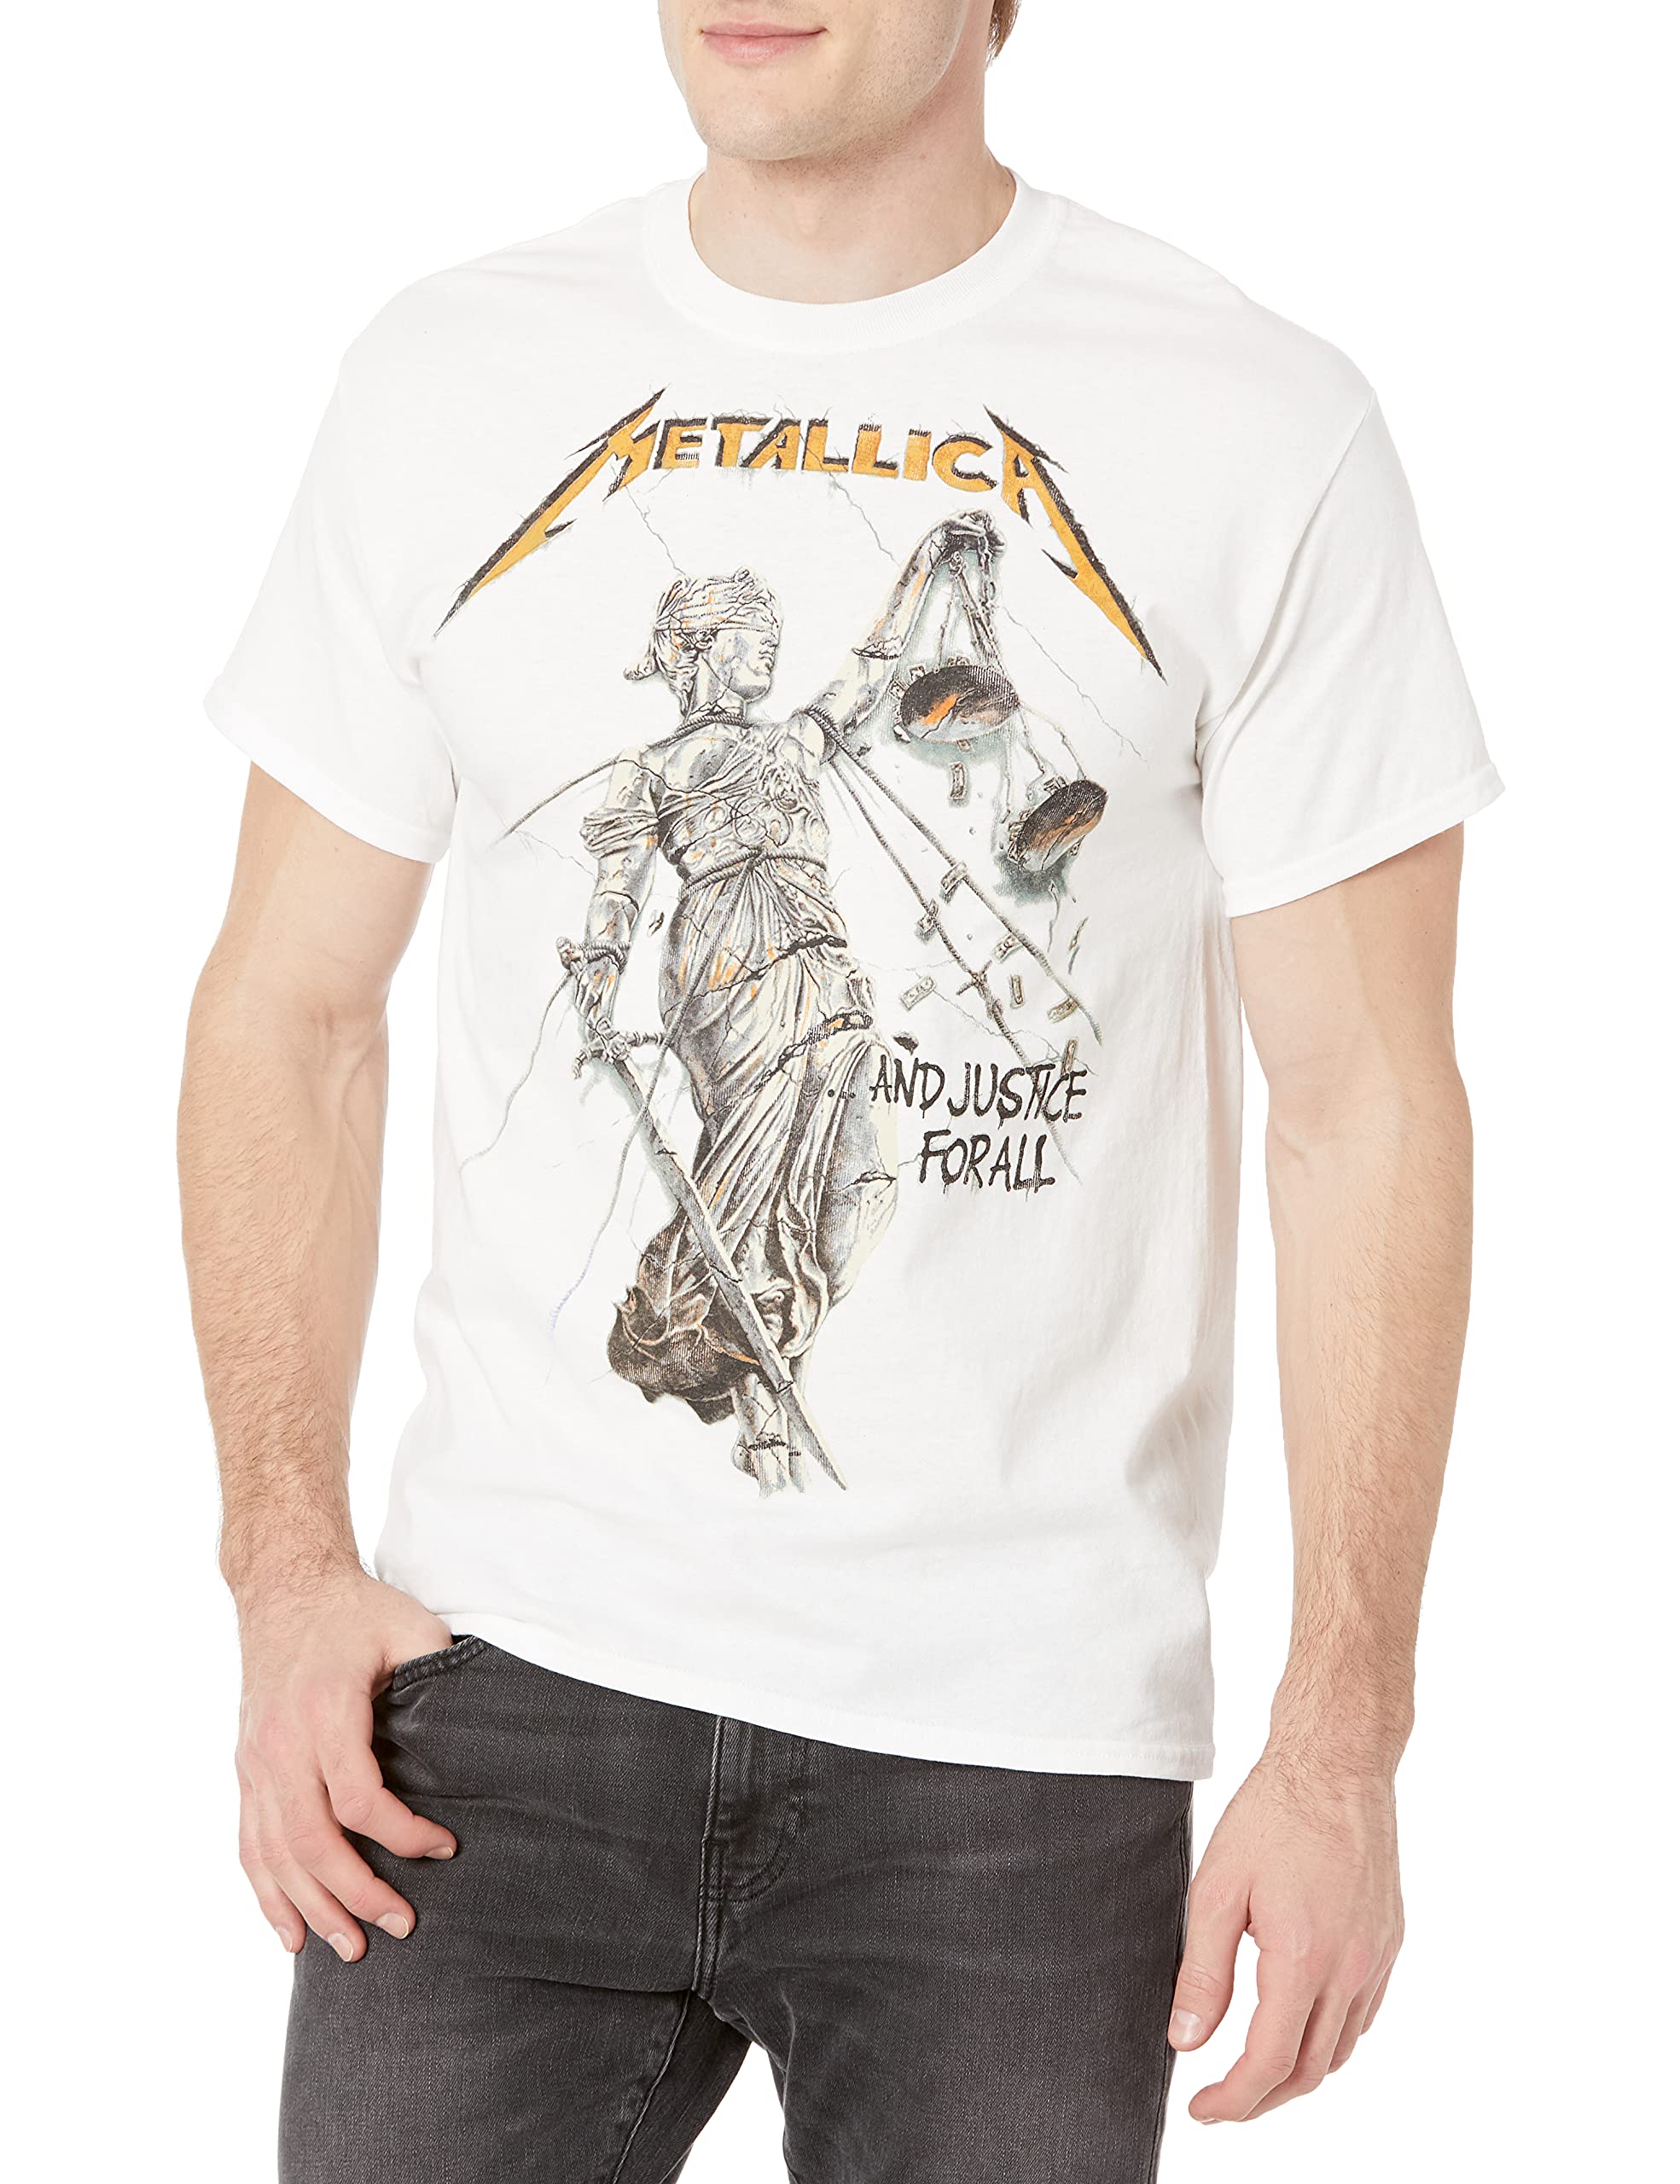 Metallica Men's Justice for All T-Shirt